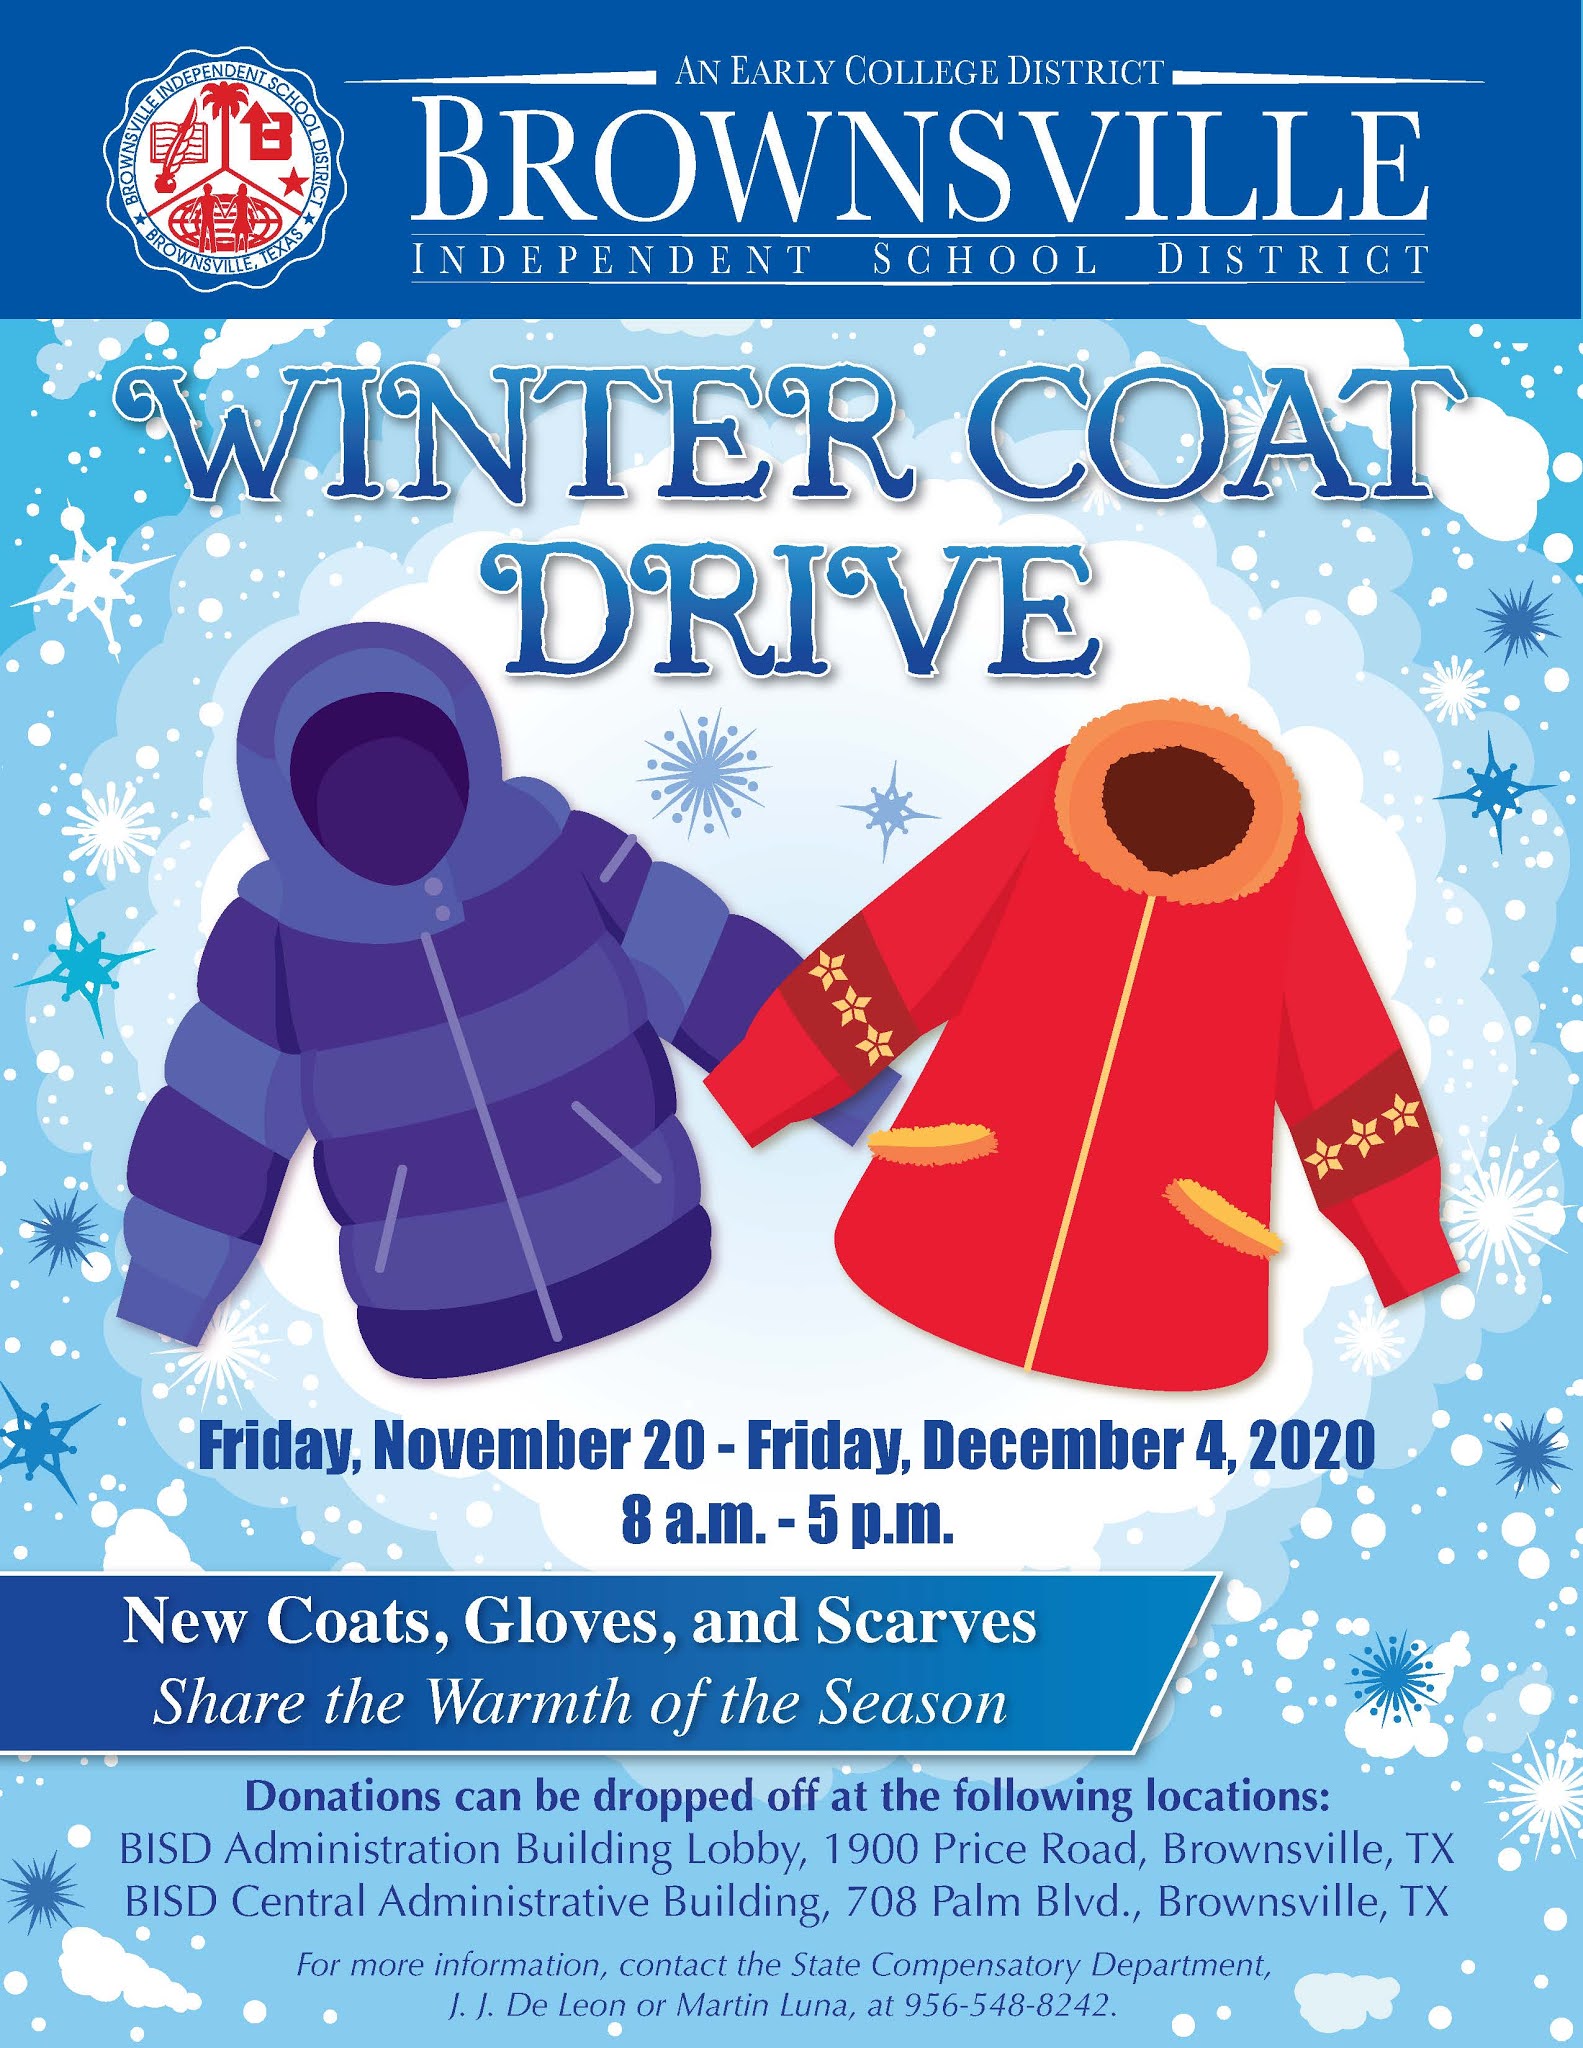 Printable Coat Drive Flyer Template Free